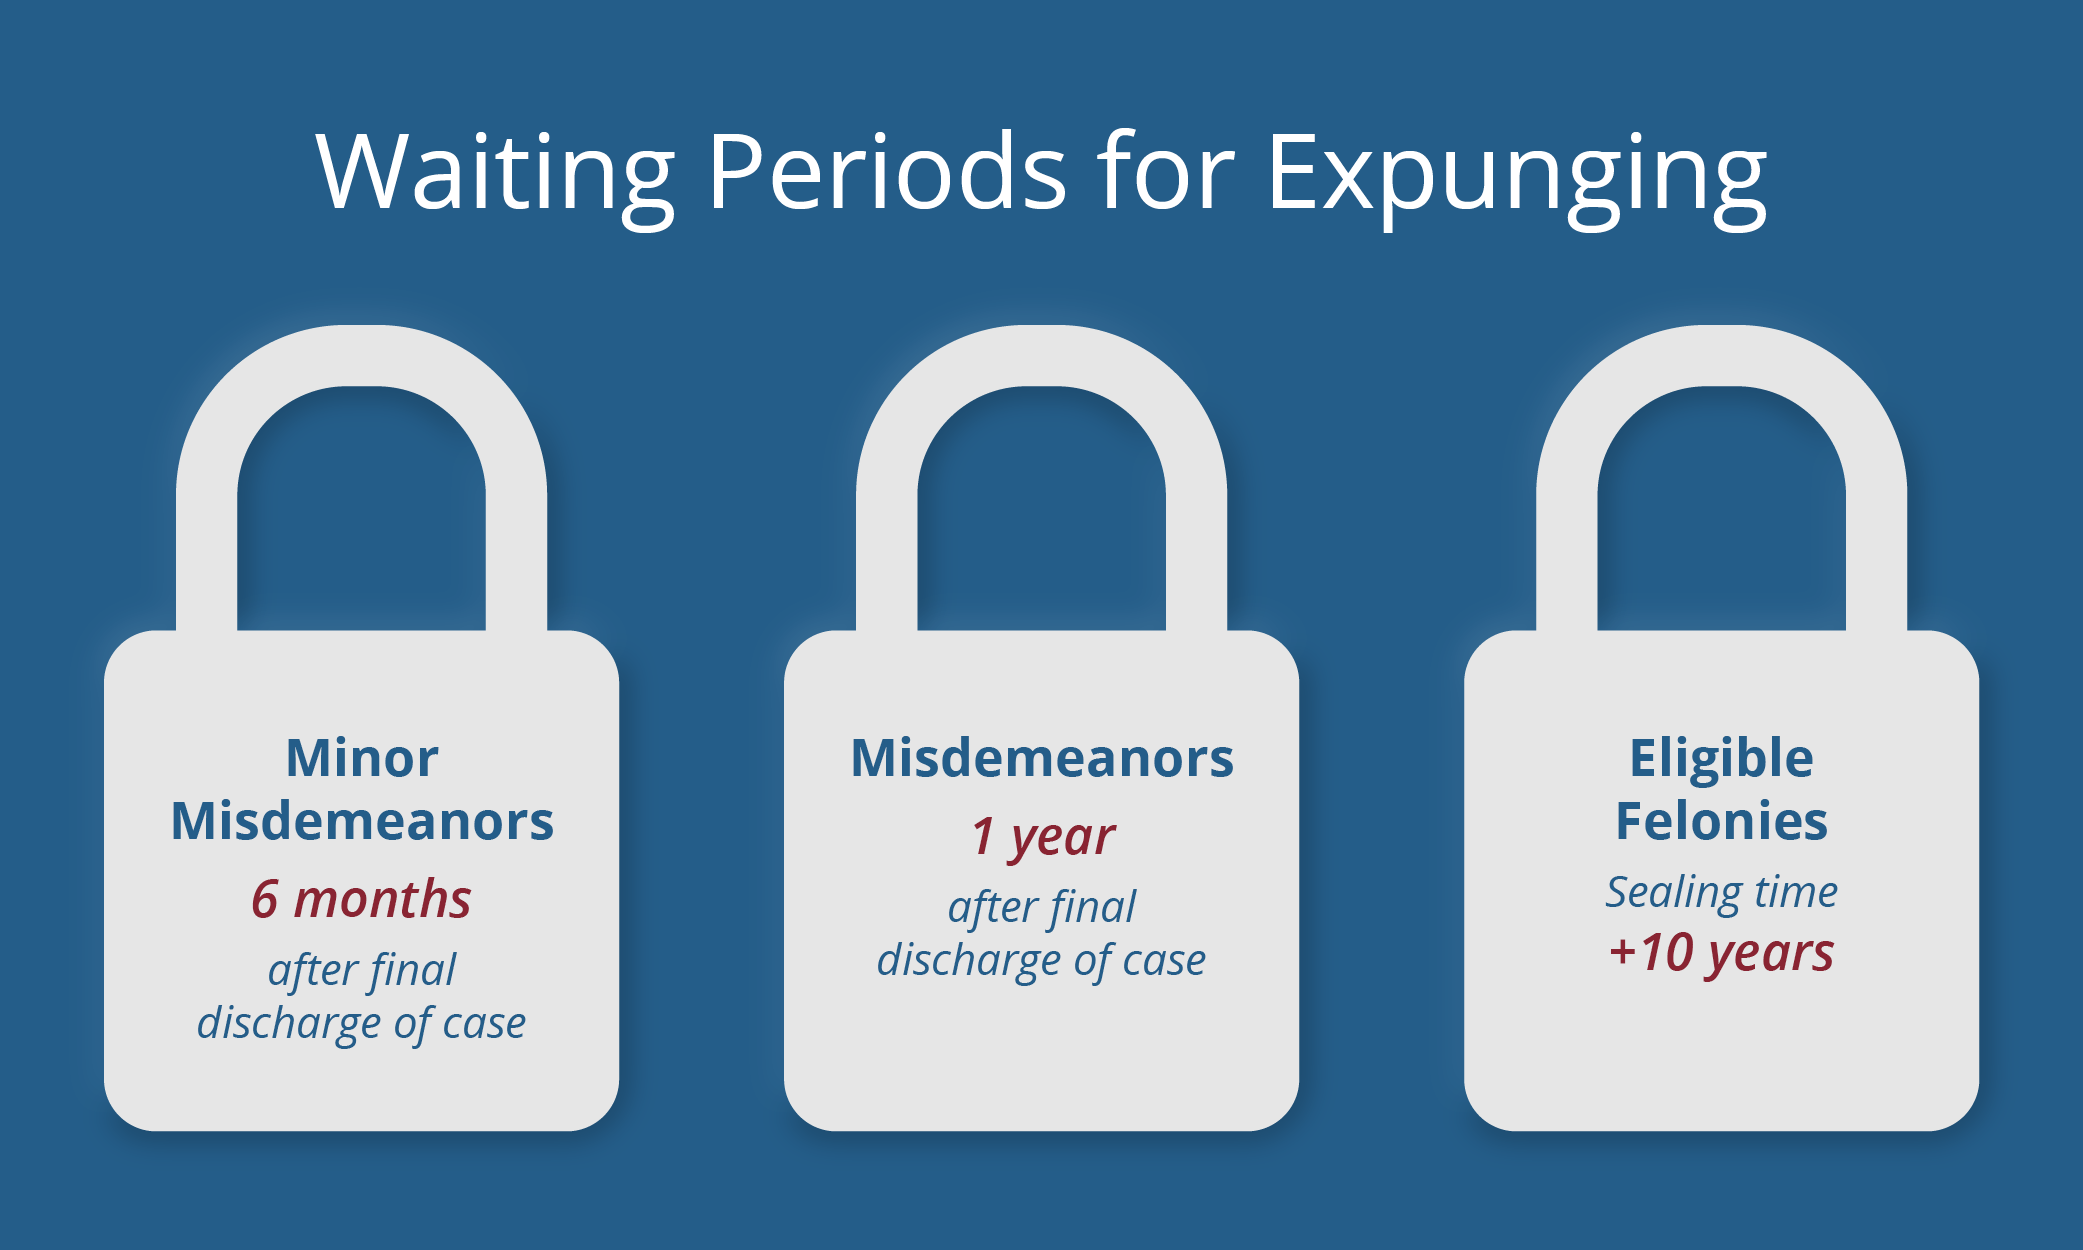 Infographic showing three padlocks. The first padlock says 'Minor Misdemeanors 6 months after final discharge of case.' The second padlock says 'Misdemeanors 1 year after final discharge of case.' The third padlock says 'Eligible Felonies sealing time +10 years.' The top of the infographic says 'Waiting periods for expunging.'